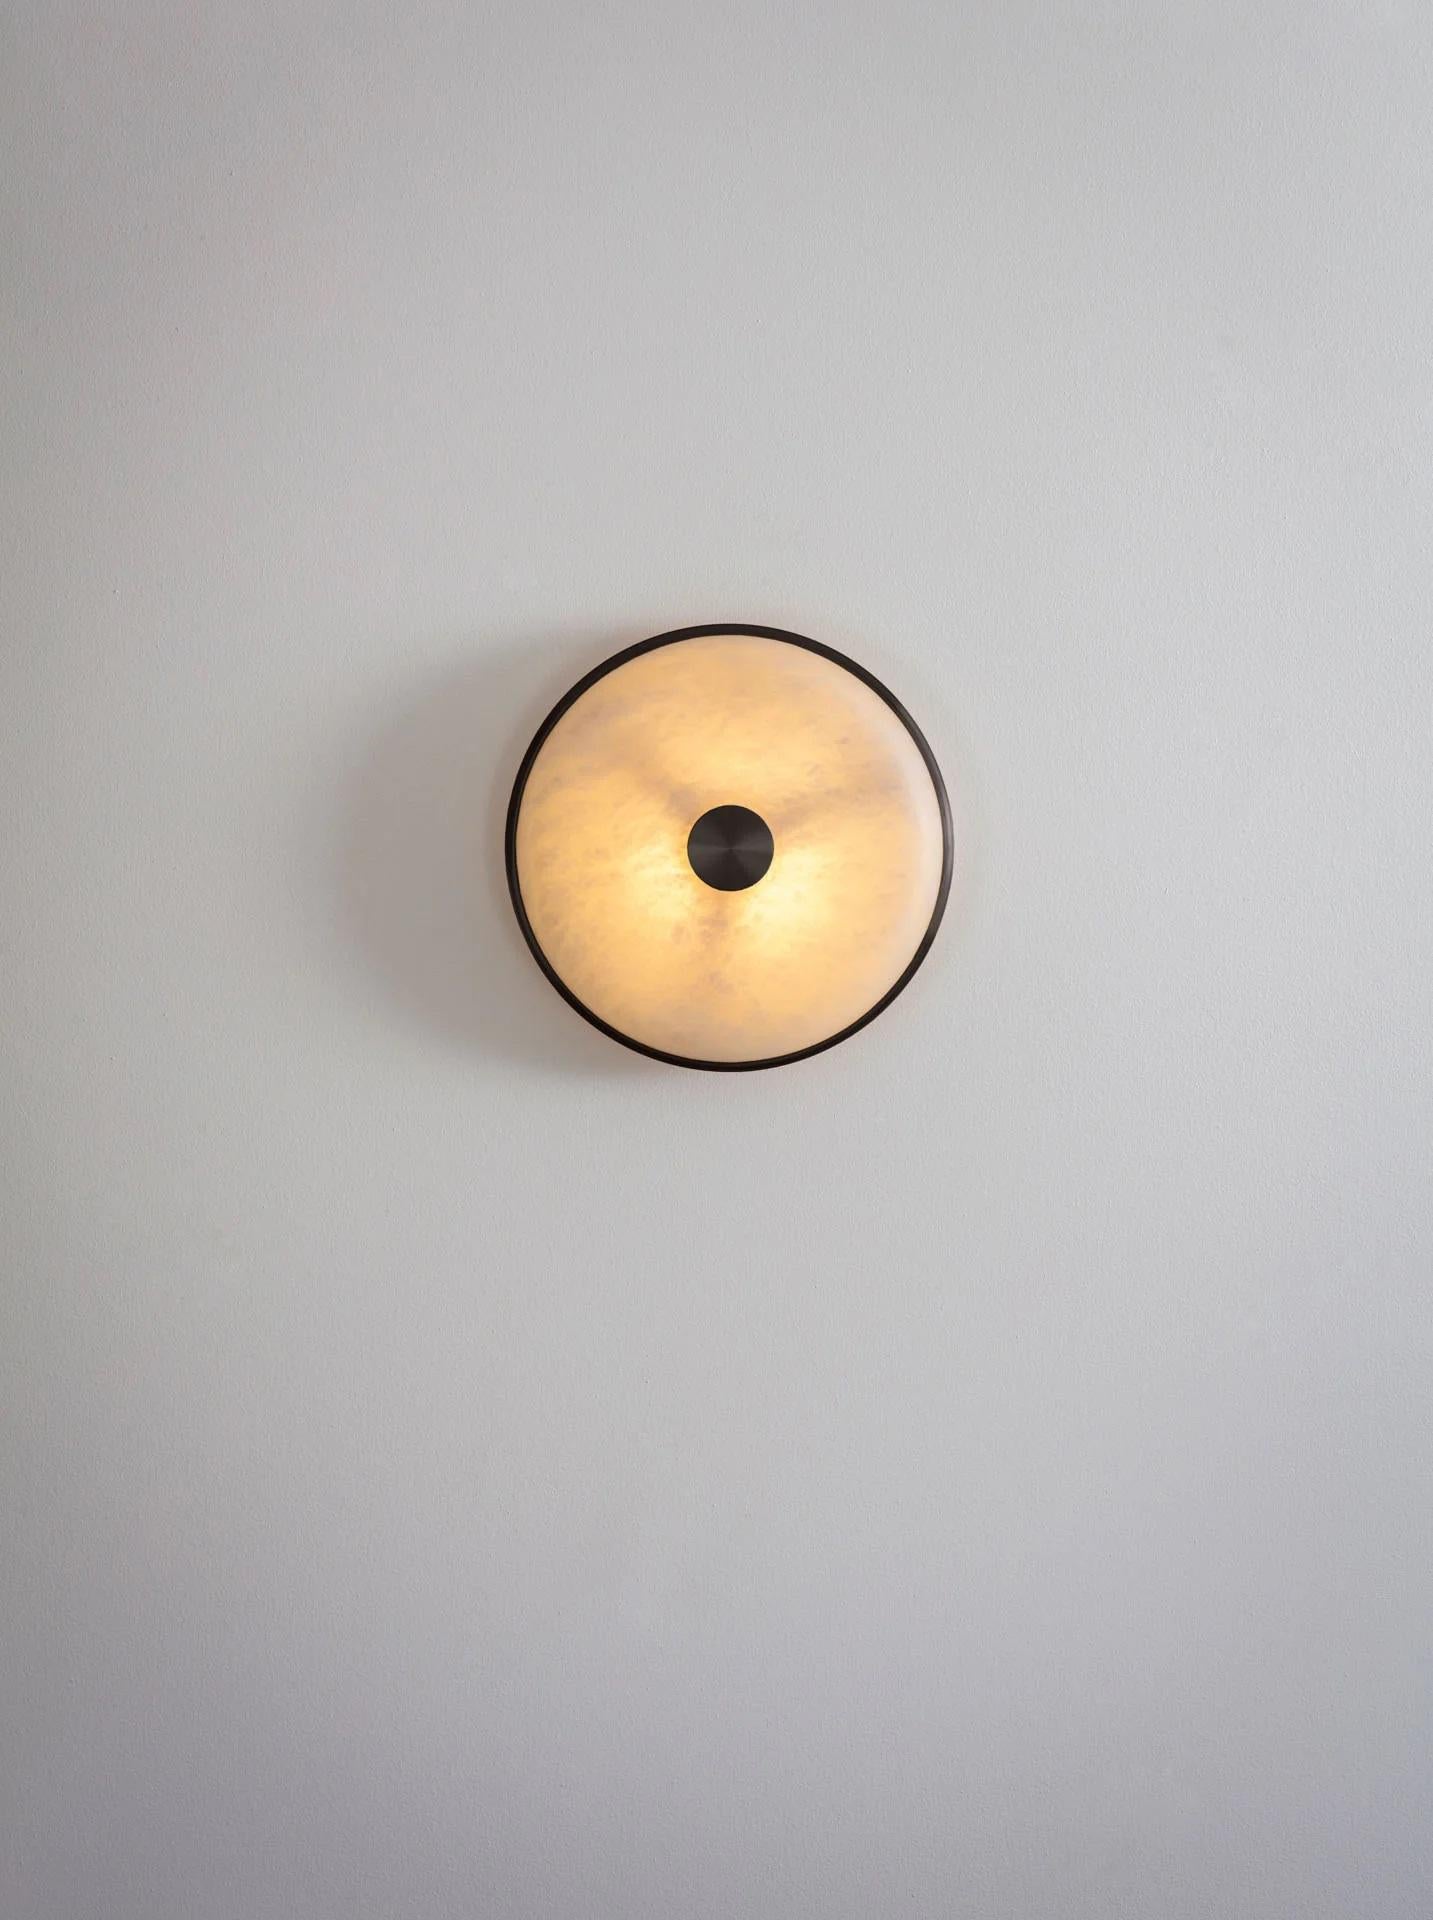 Beran Dark Bronze Small Wall Light by Bert Frank
Dimensions: D 6,5 x W 26 x H 26 cm.
Materials: Bronze and alabaster.

Available in two different sizes. Available in different finishes and materials. Please contact us. 

Simple and elegant in form,